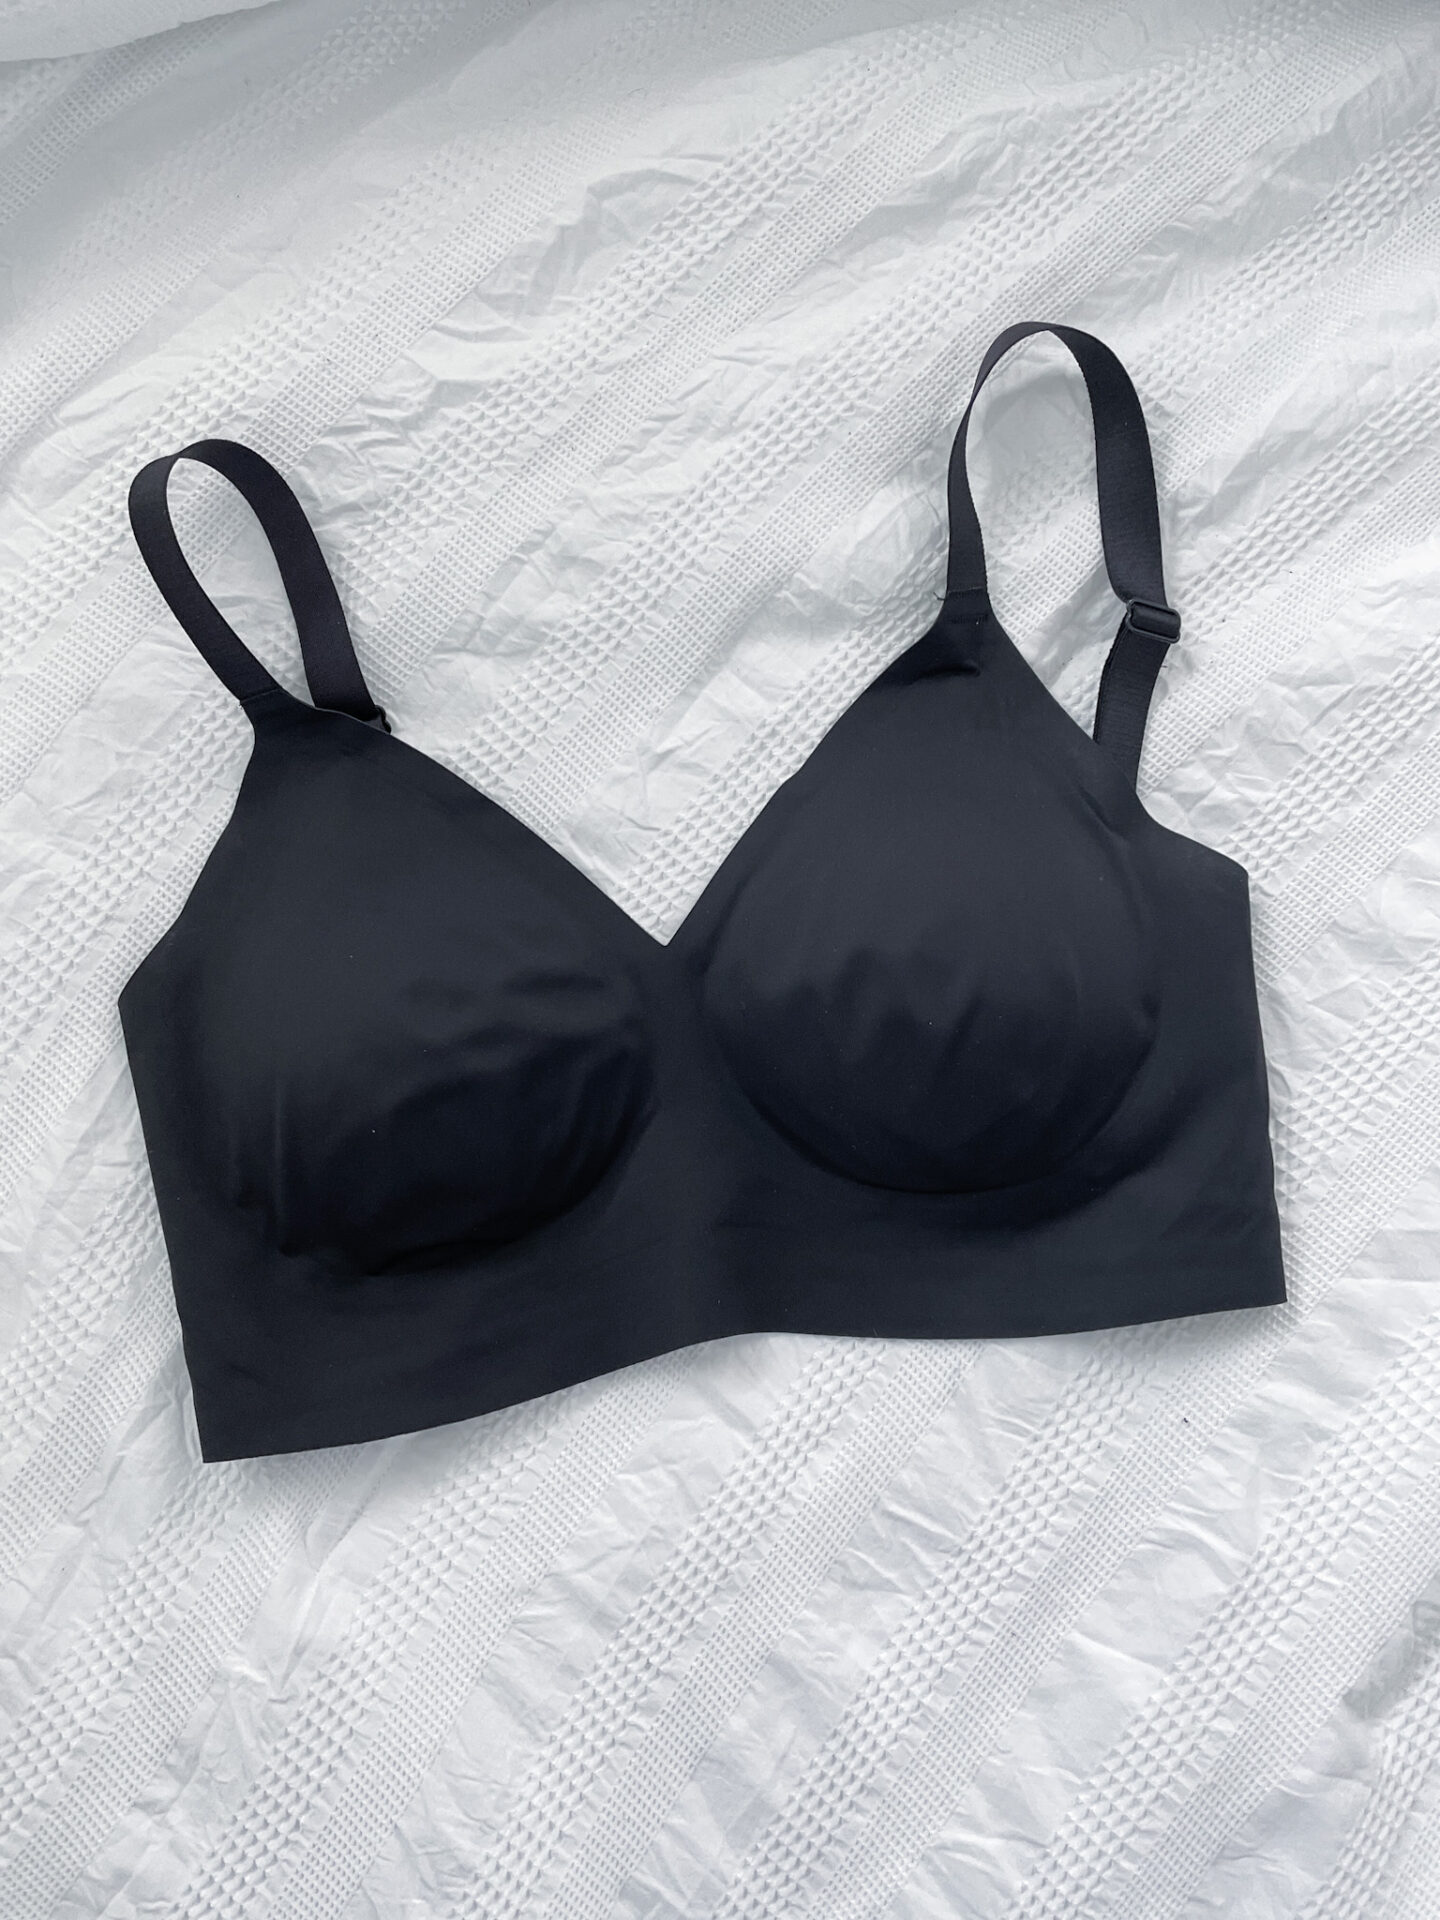 Yes, Your Bra Has an Expiration Date - Living in Yellow